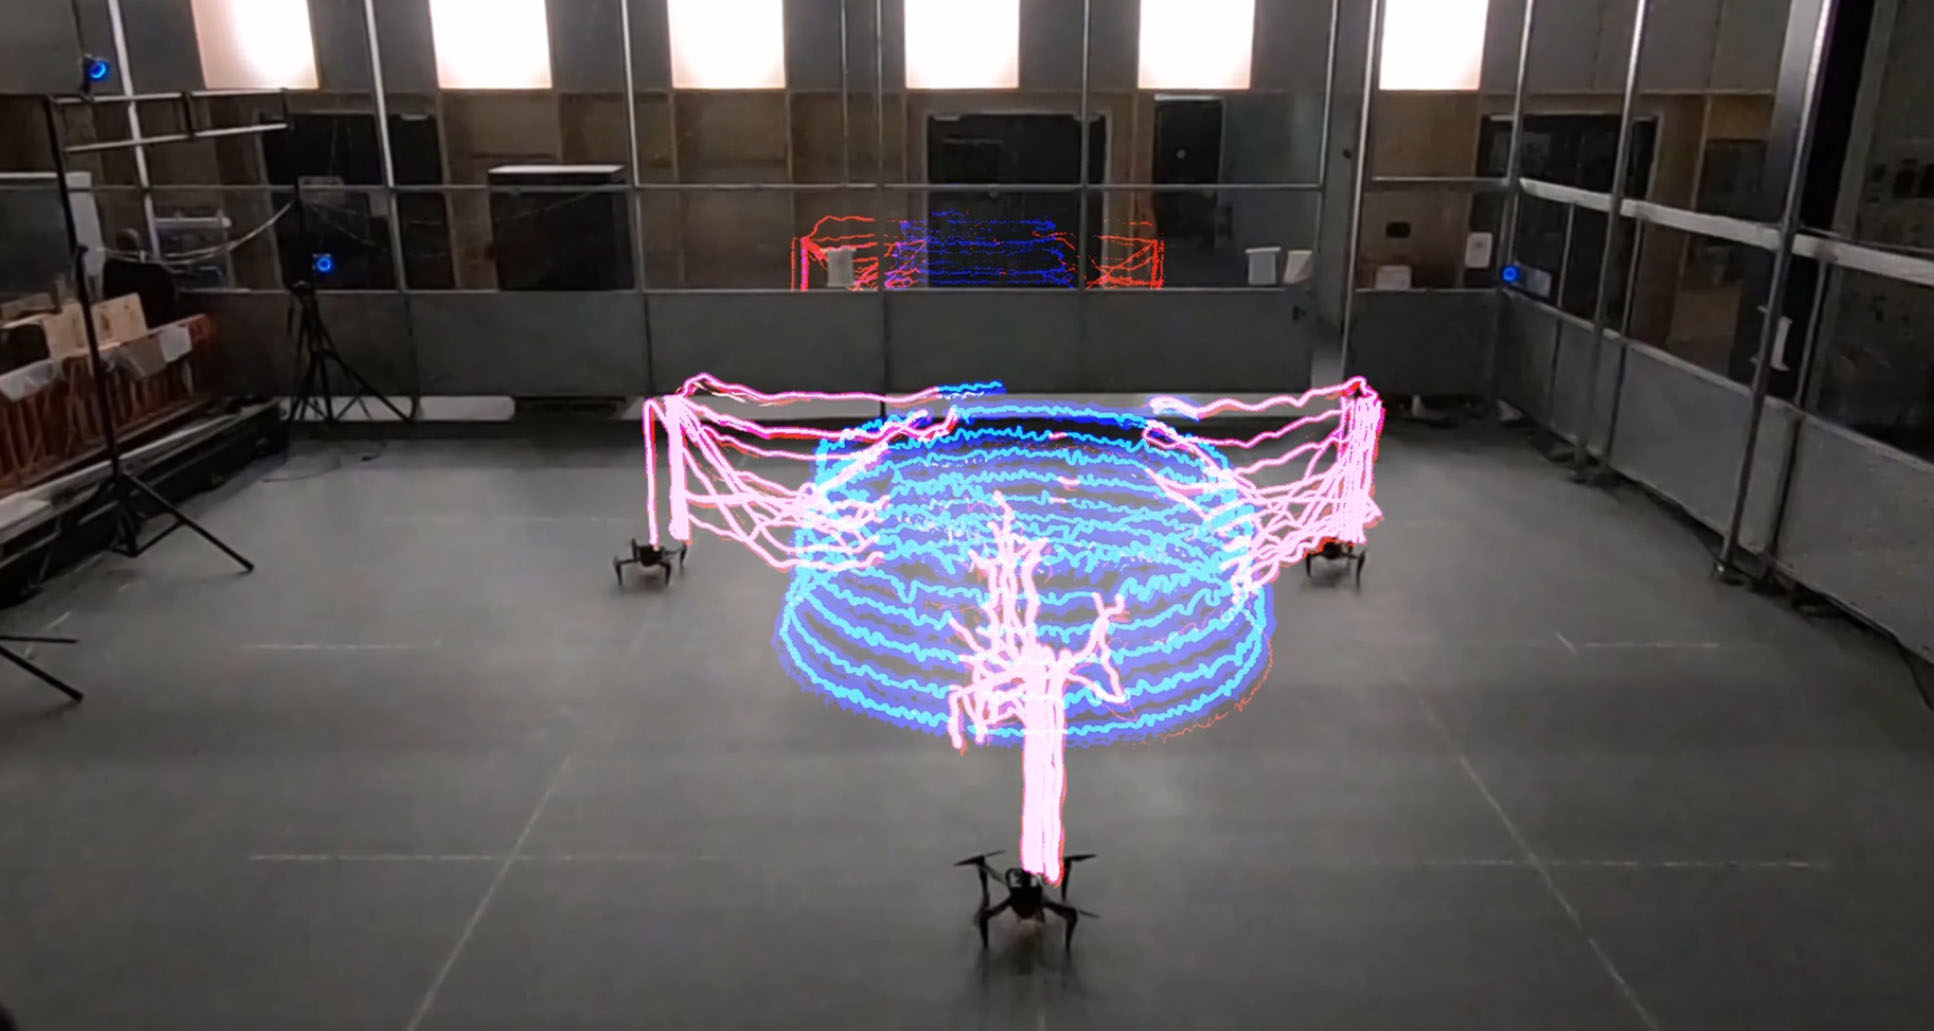 A simulation of potential future building projects 3D printed by flying drones